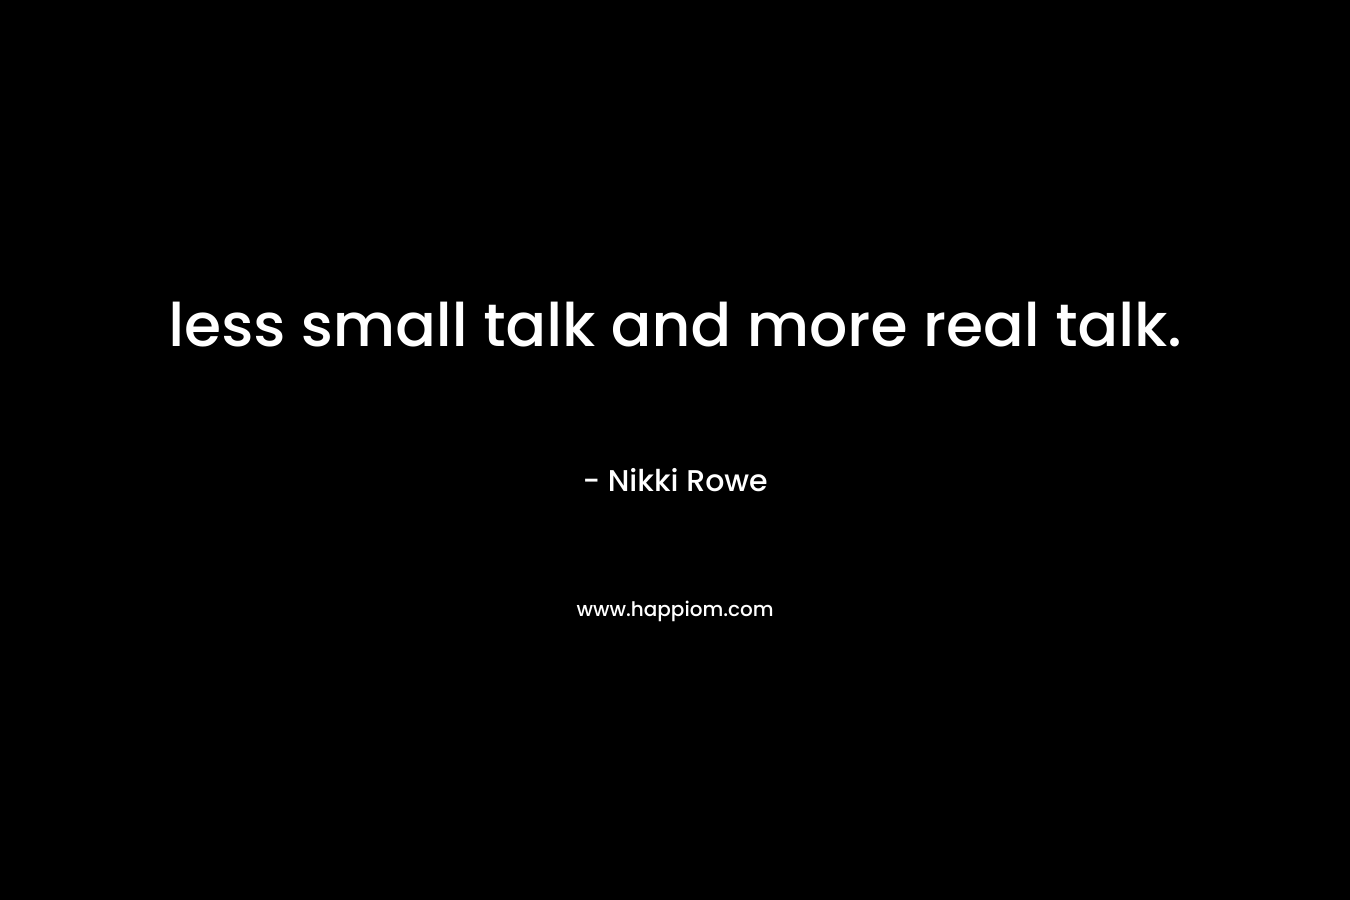 less small talk and more real talk.